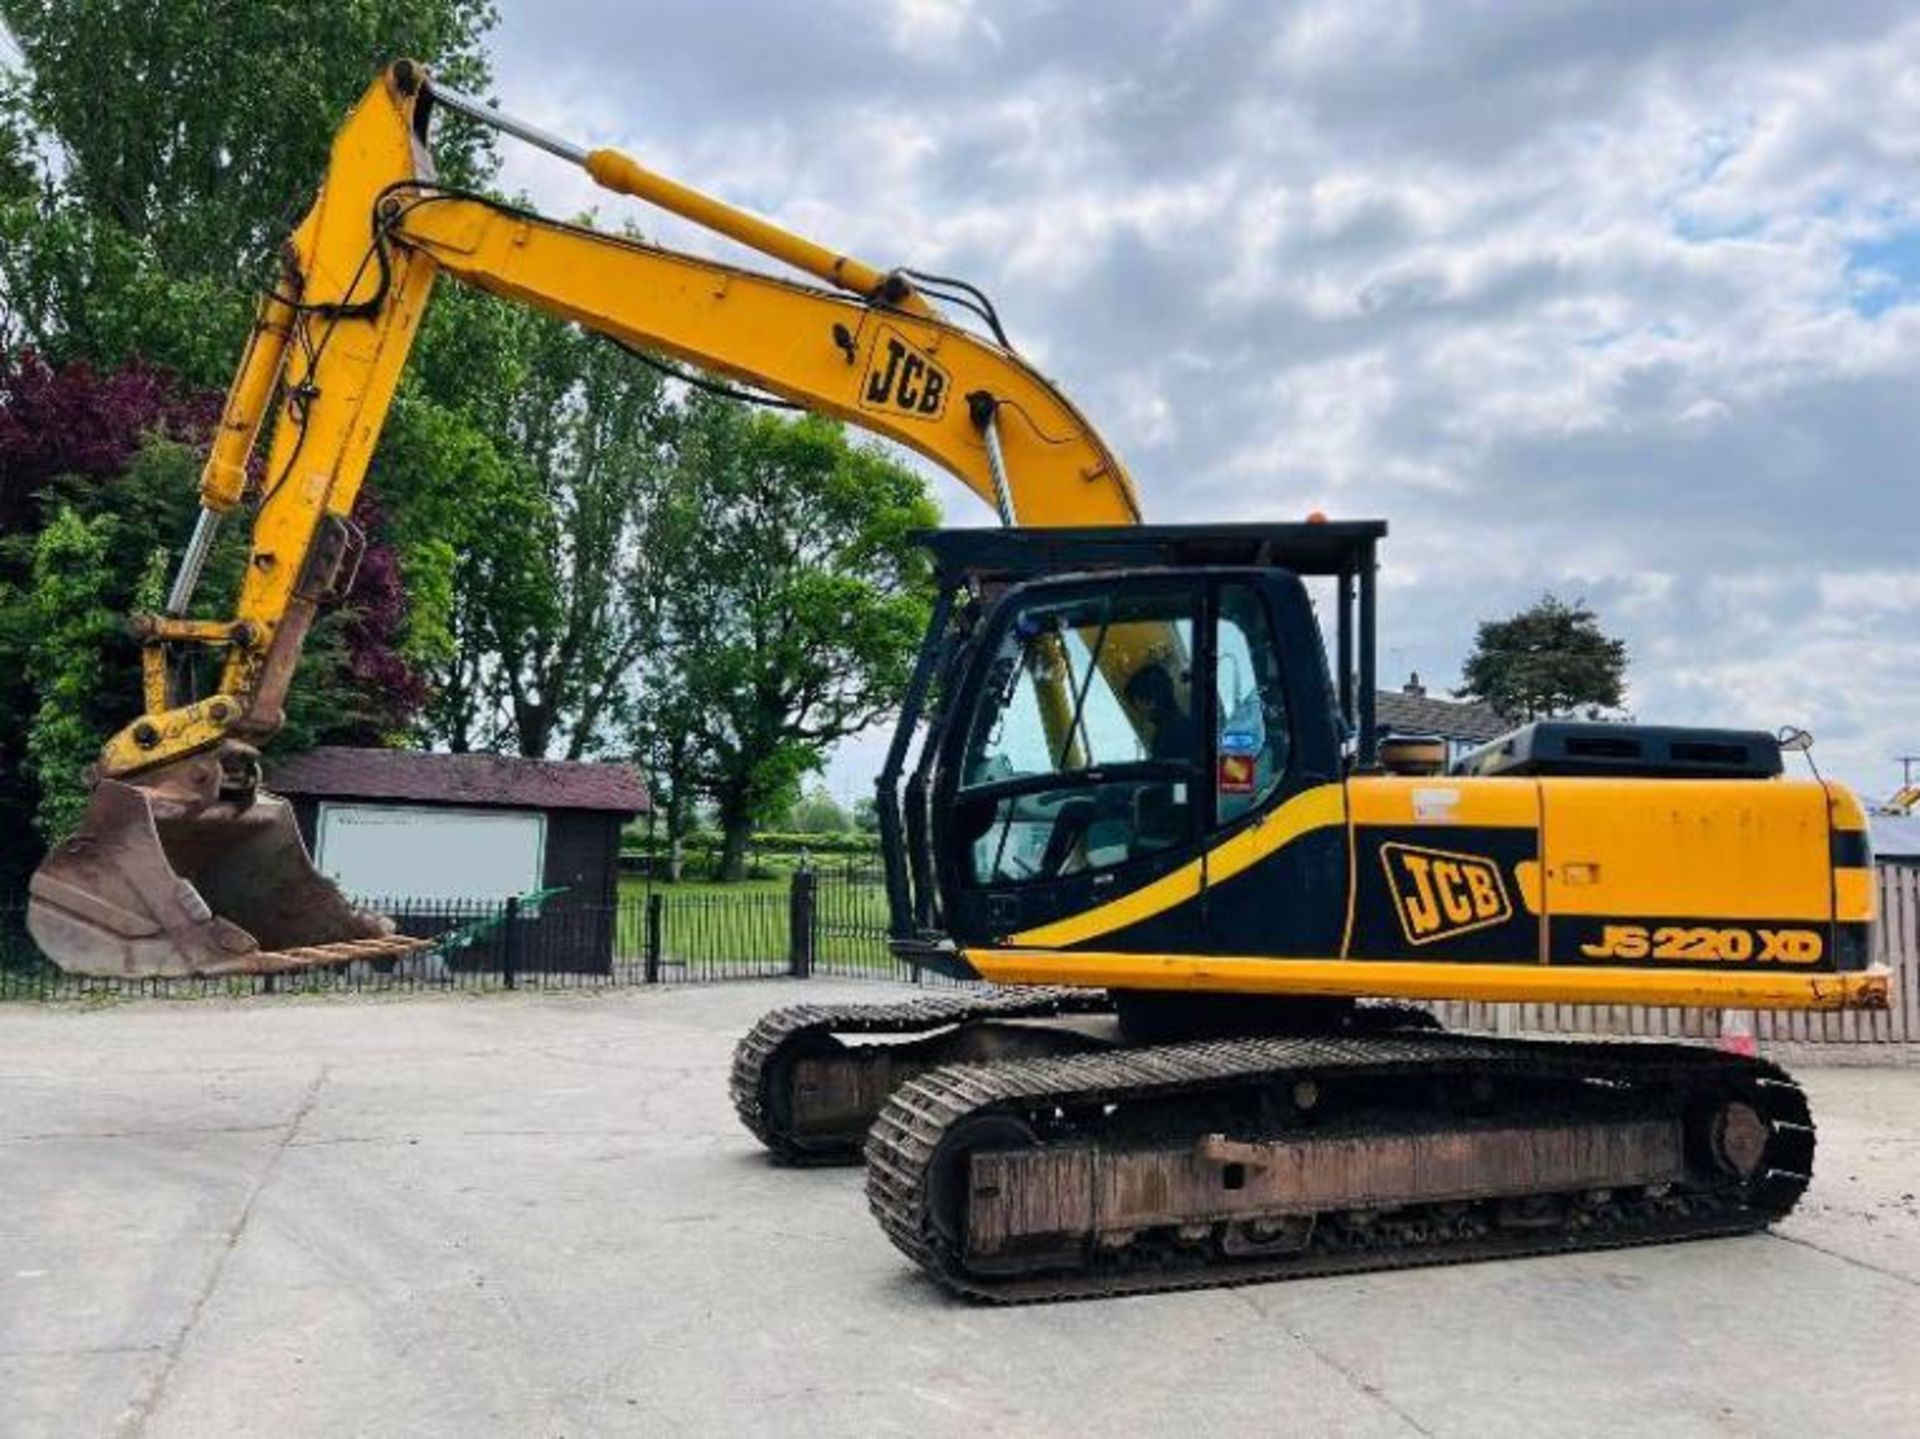 JCB JS220 TRACKED EXCAVATOR C/W QUICK HITCH & BUCKET - RECENTLY SERVICED